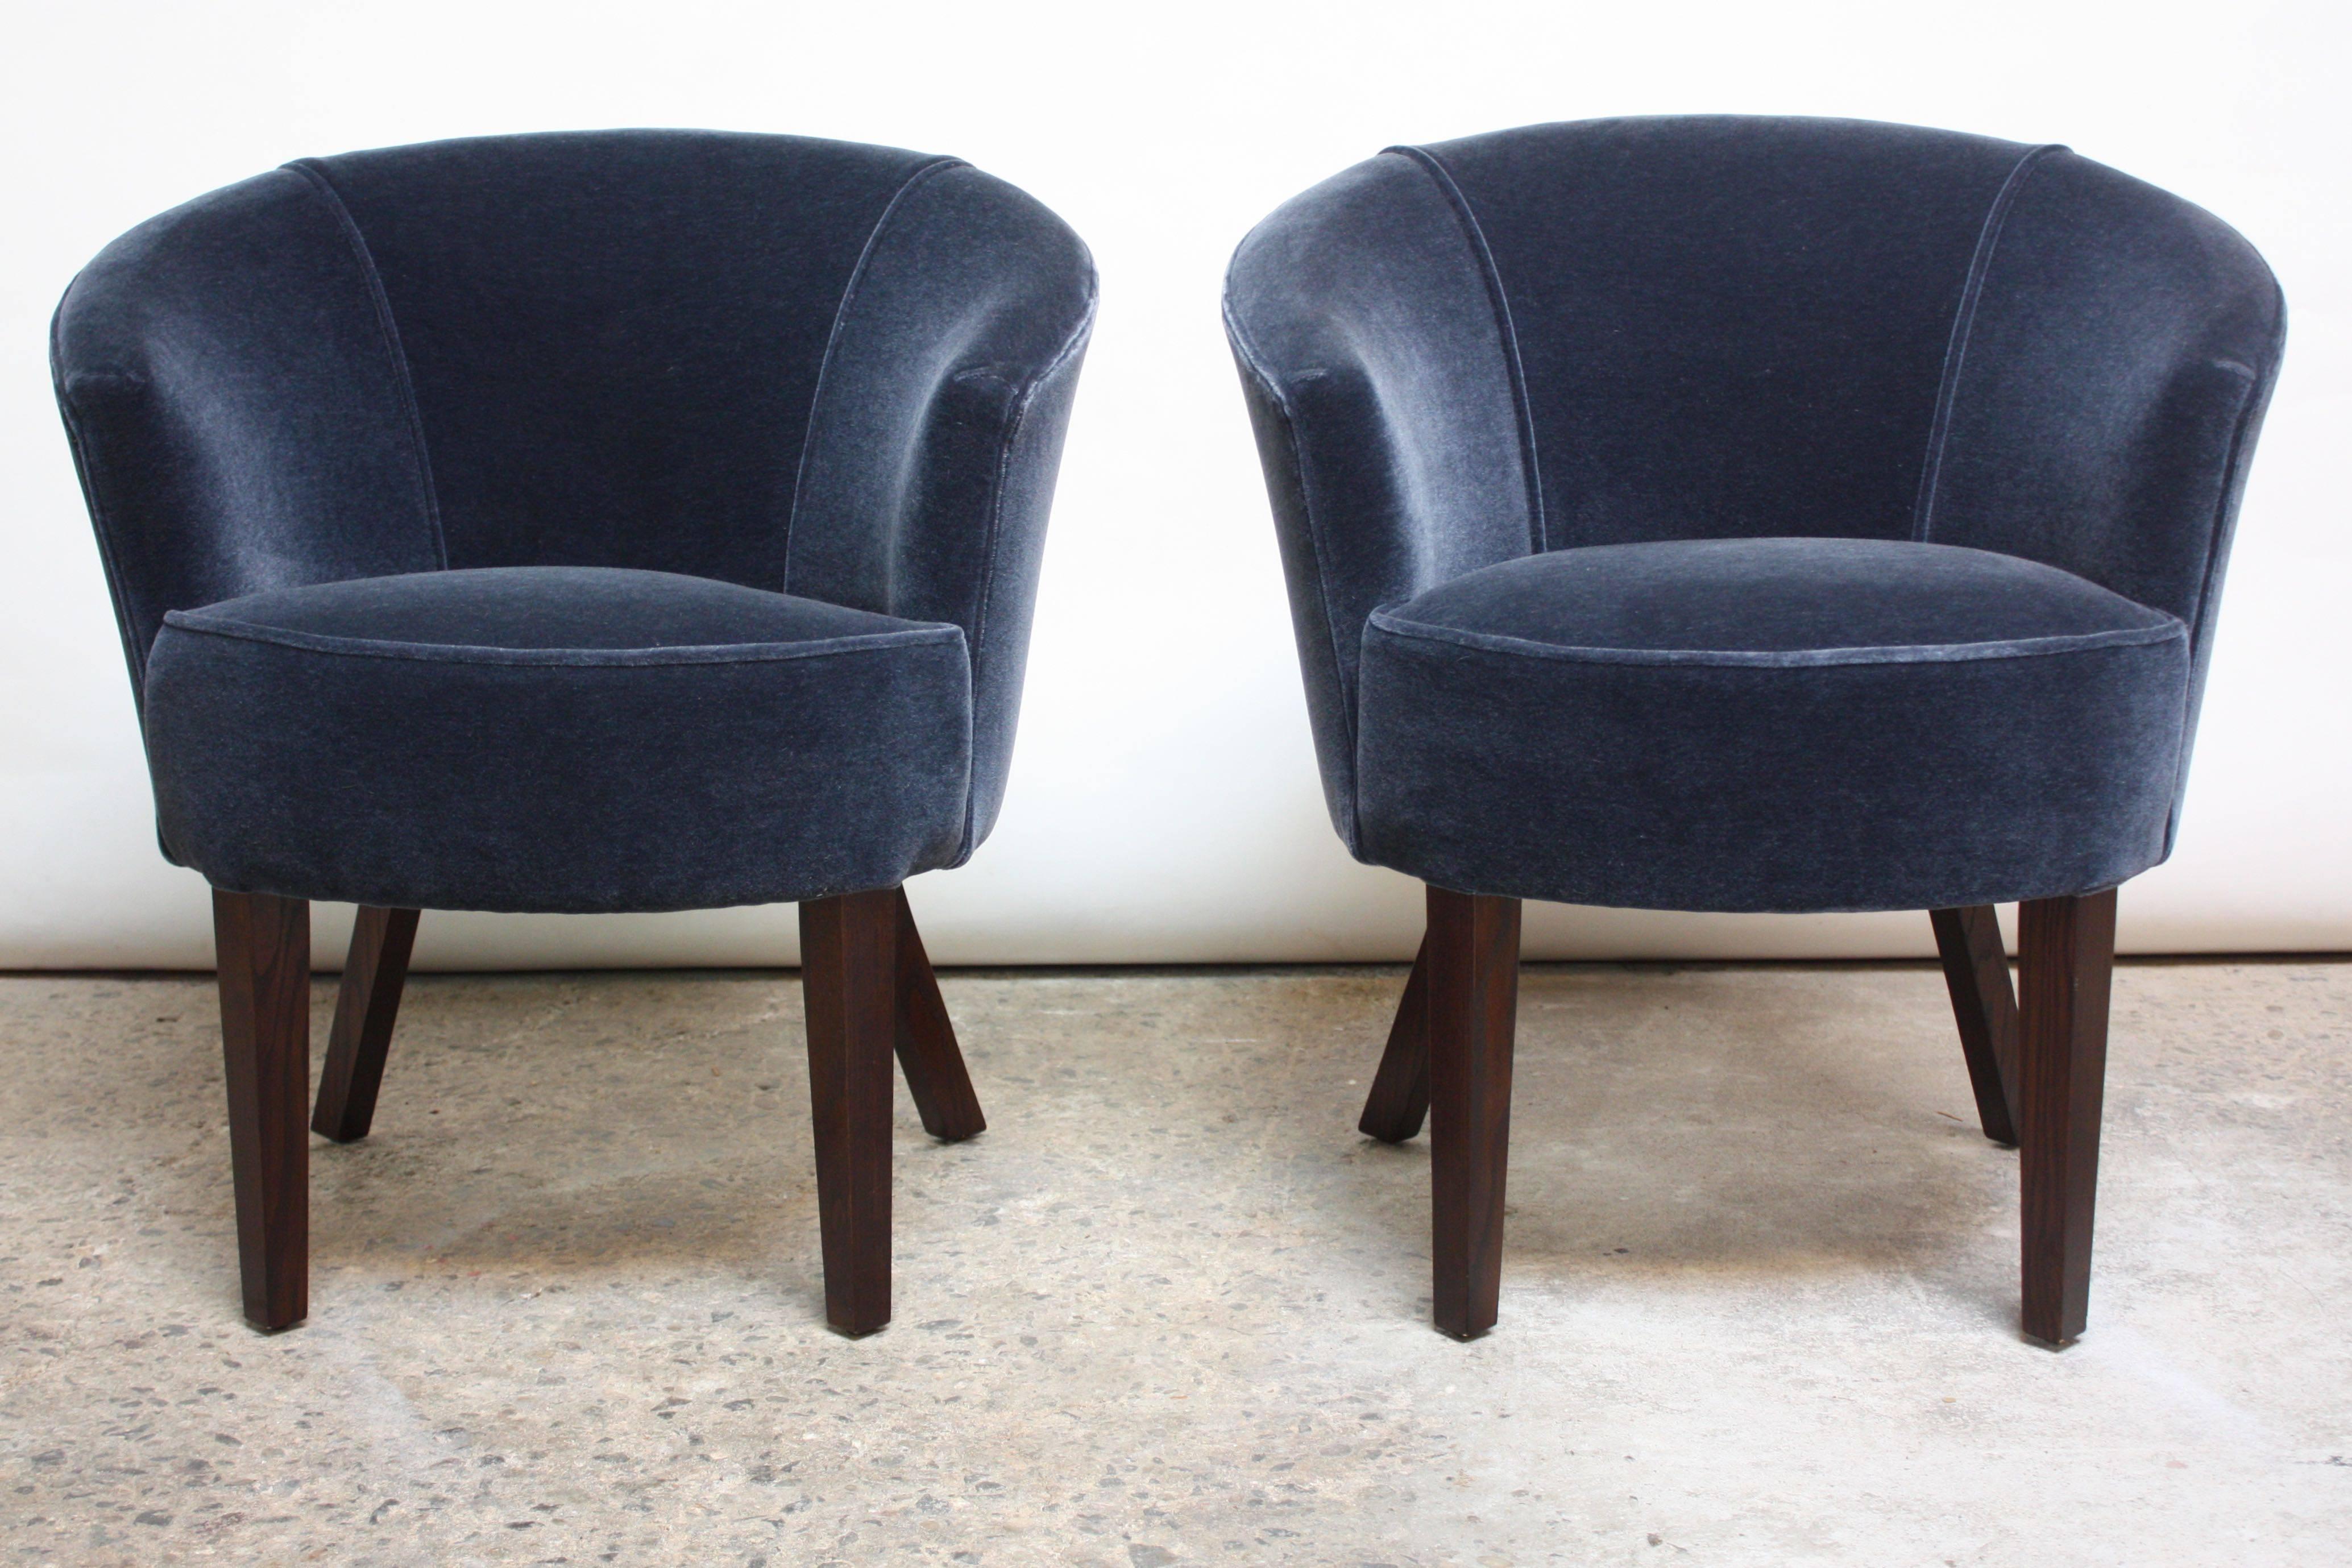 Diminutive tub chairs by George Smith in a 'baltic blue' mohair (100% mohair pile). Legs, which splay slightly in the back, are finished in a dark oak stain. Purchased for a project but never used, so these remain in like new condition.
Seat